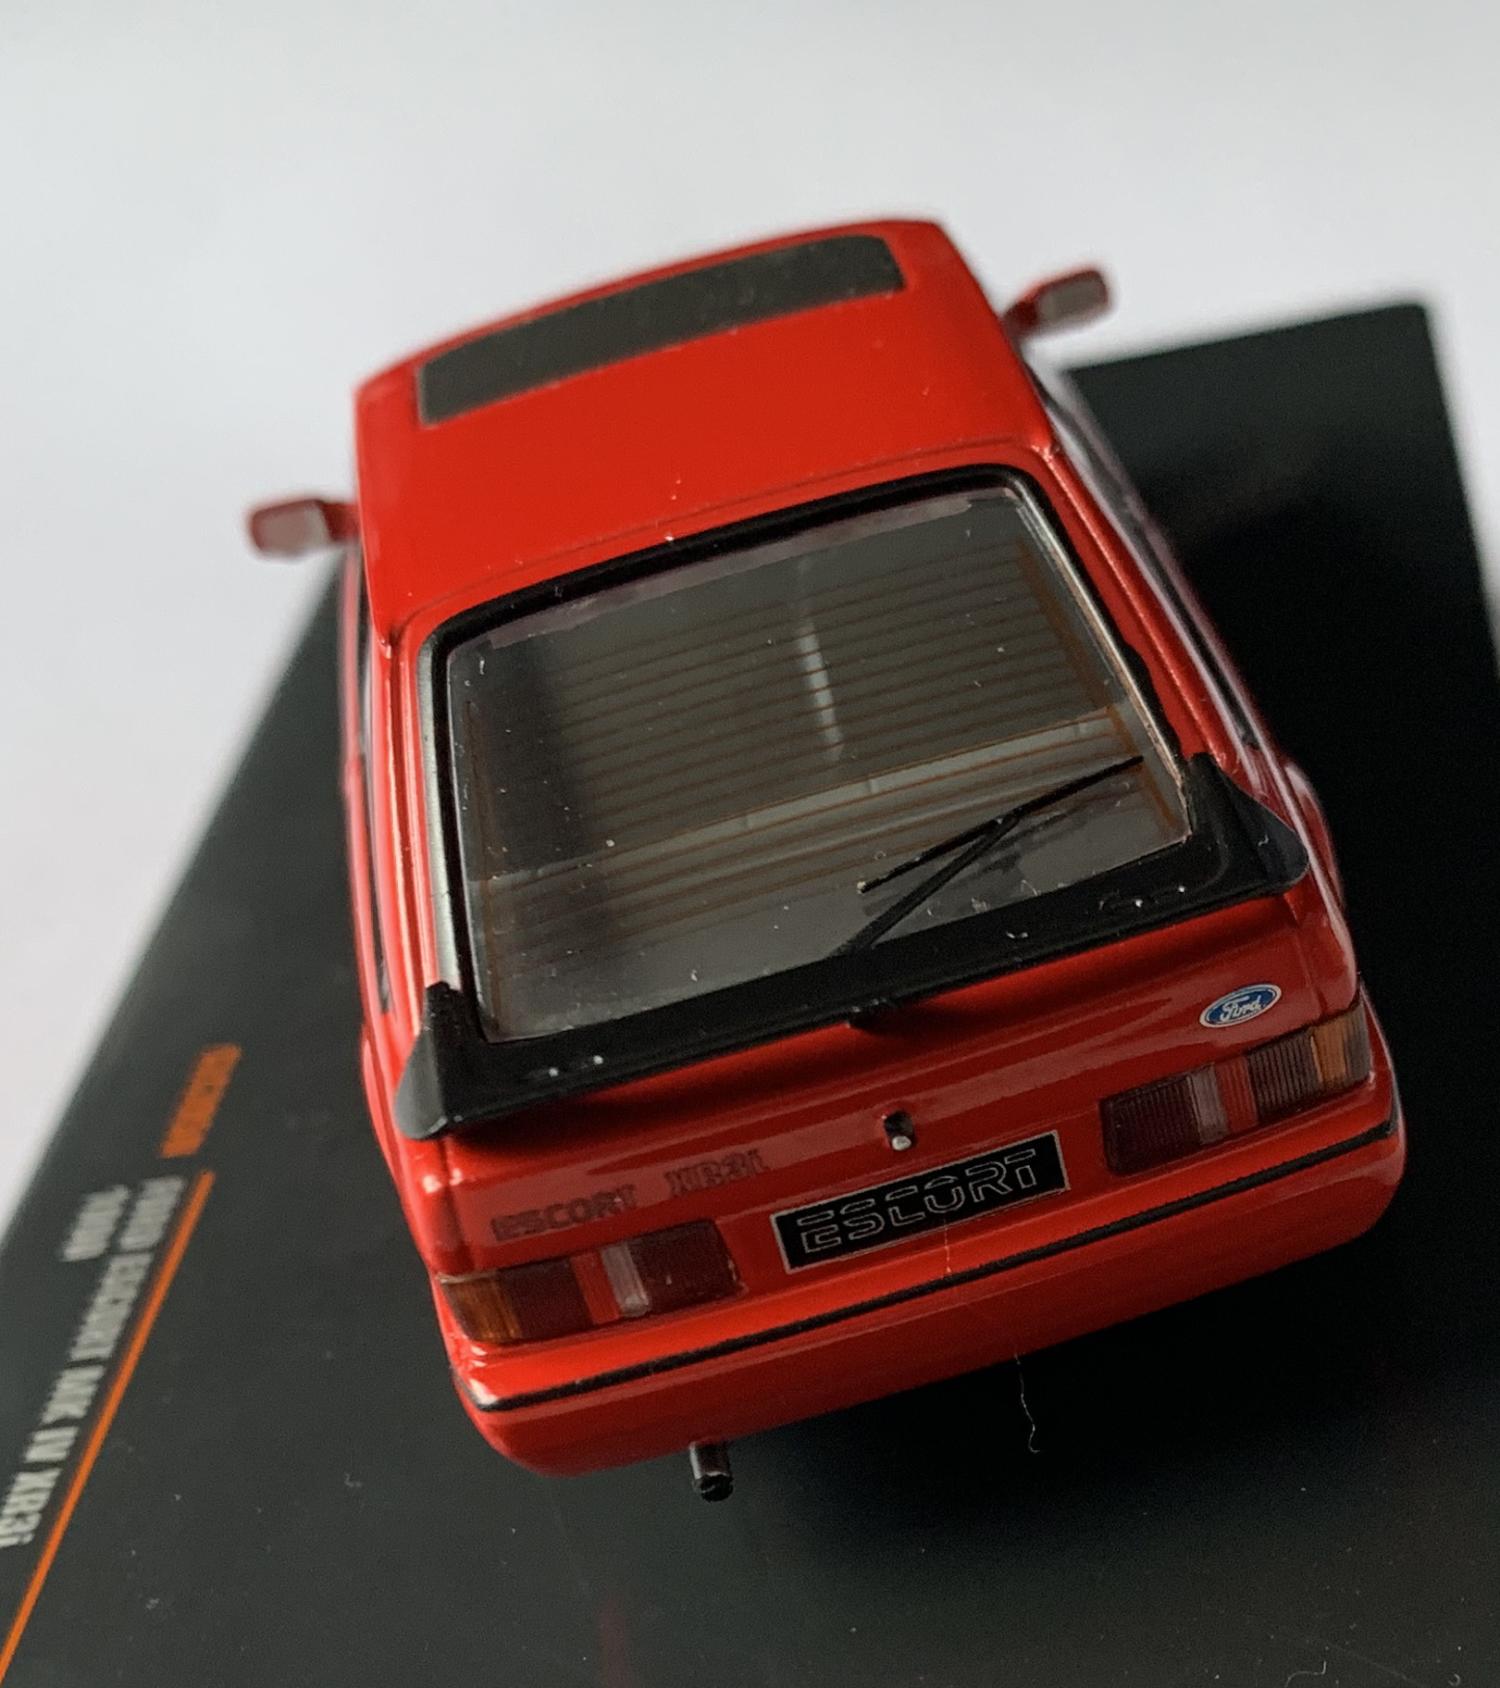 A good reproduction of the Ford Escort mk 4 XR3i with detail throughout, all authentically recreated. Model is presented on a removable plinth with a removable hard plastic cover